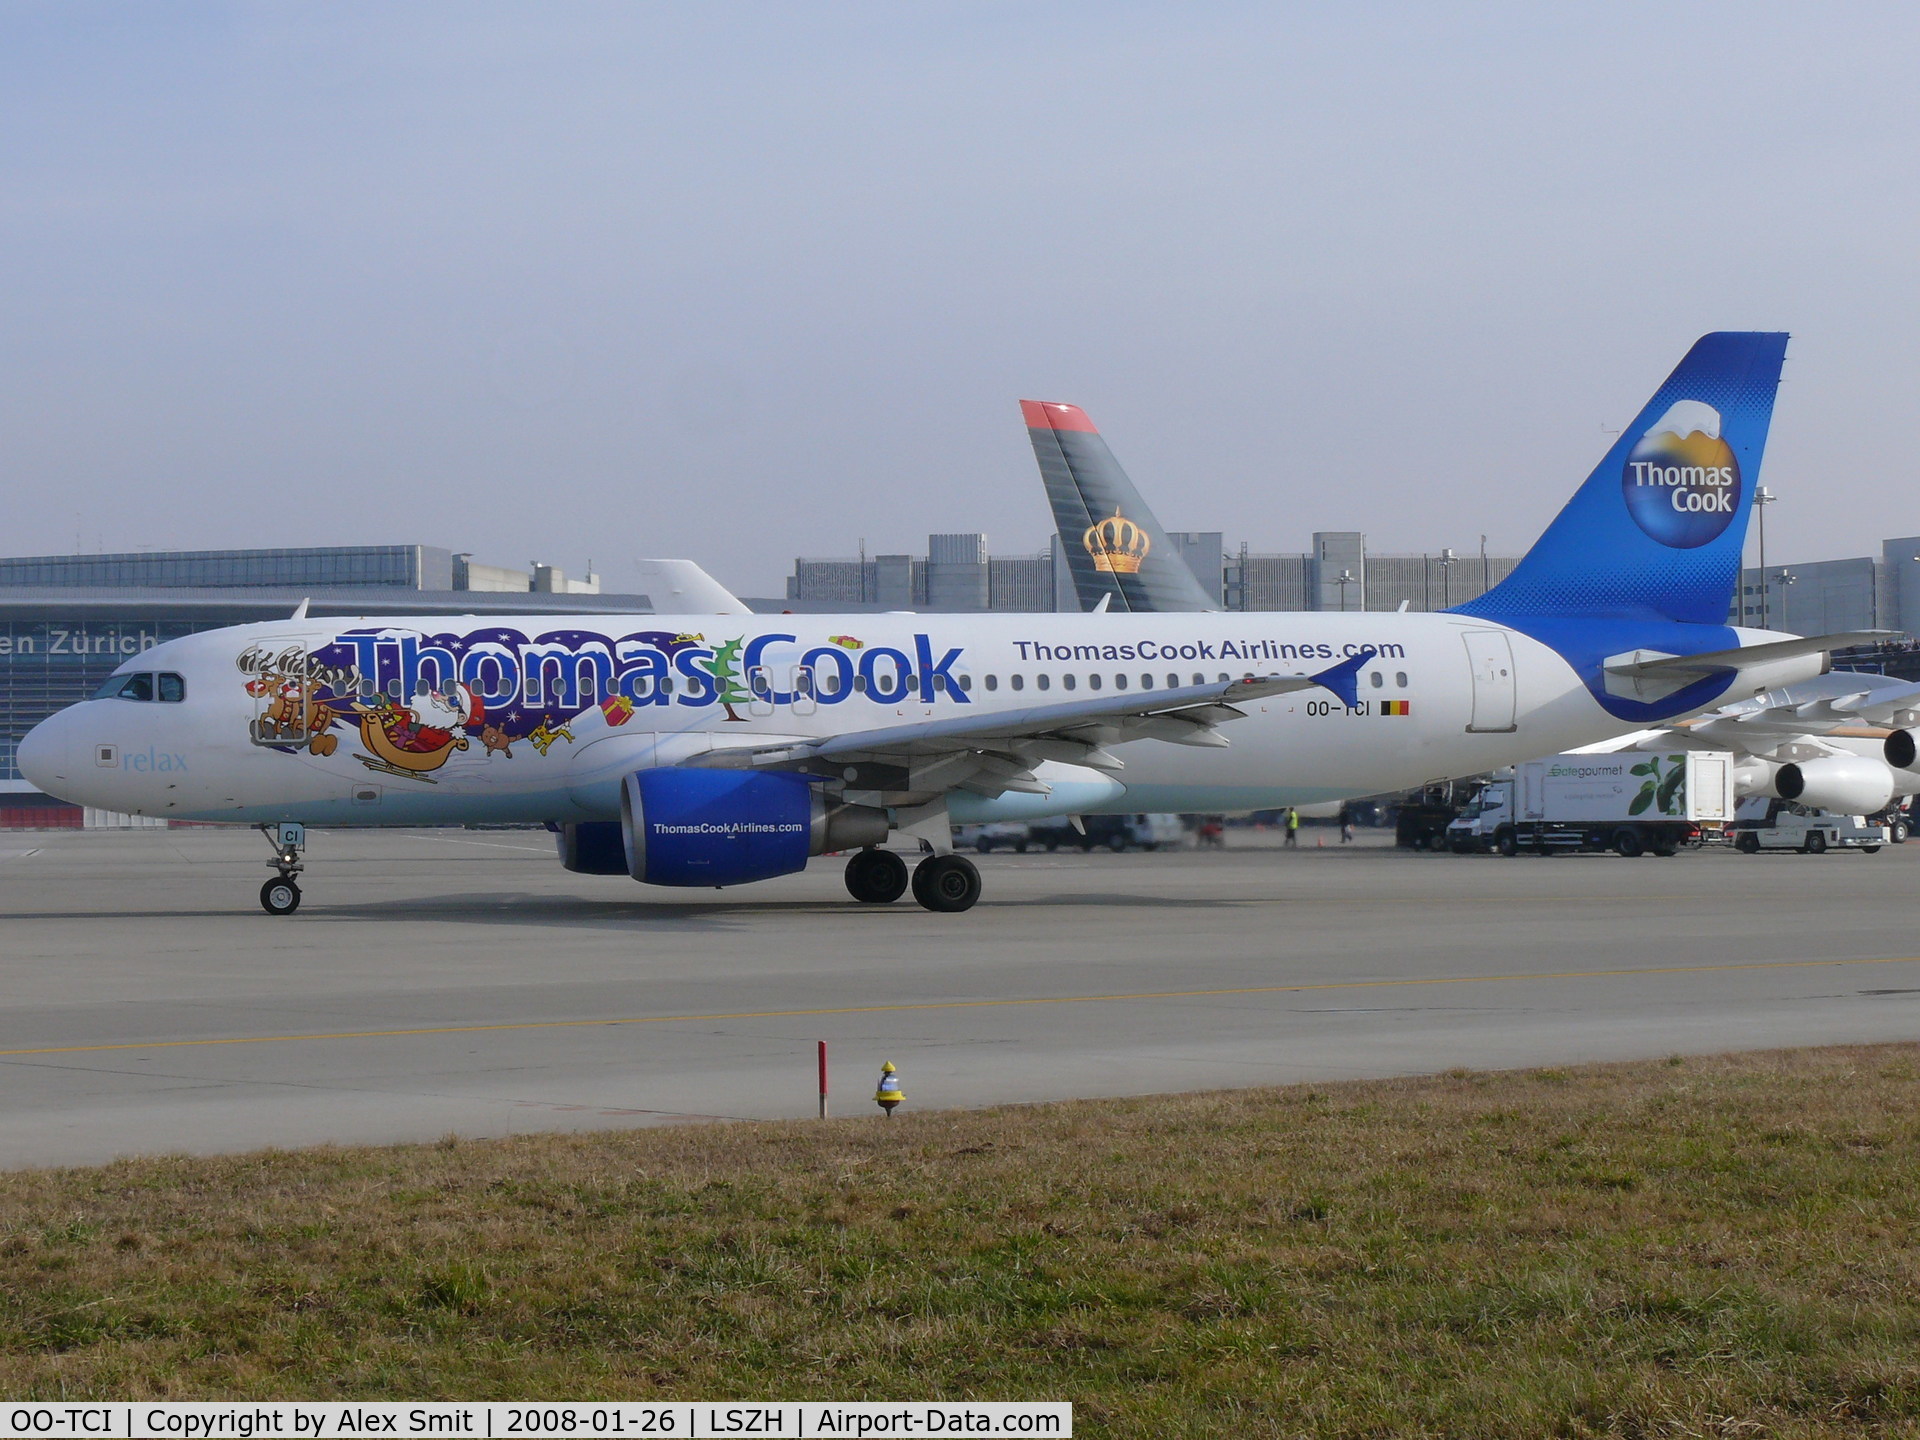 OO-TCI, 2003 Airbus A320-214 C/N 1975, Airbus in a funny Christmas-livery